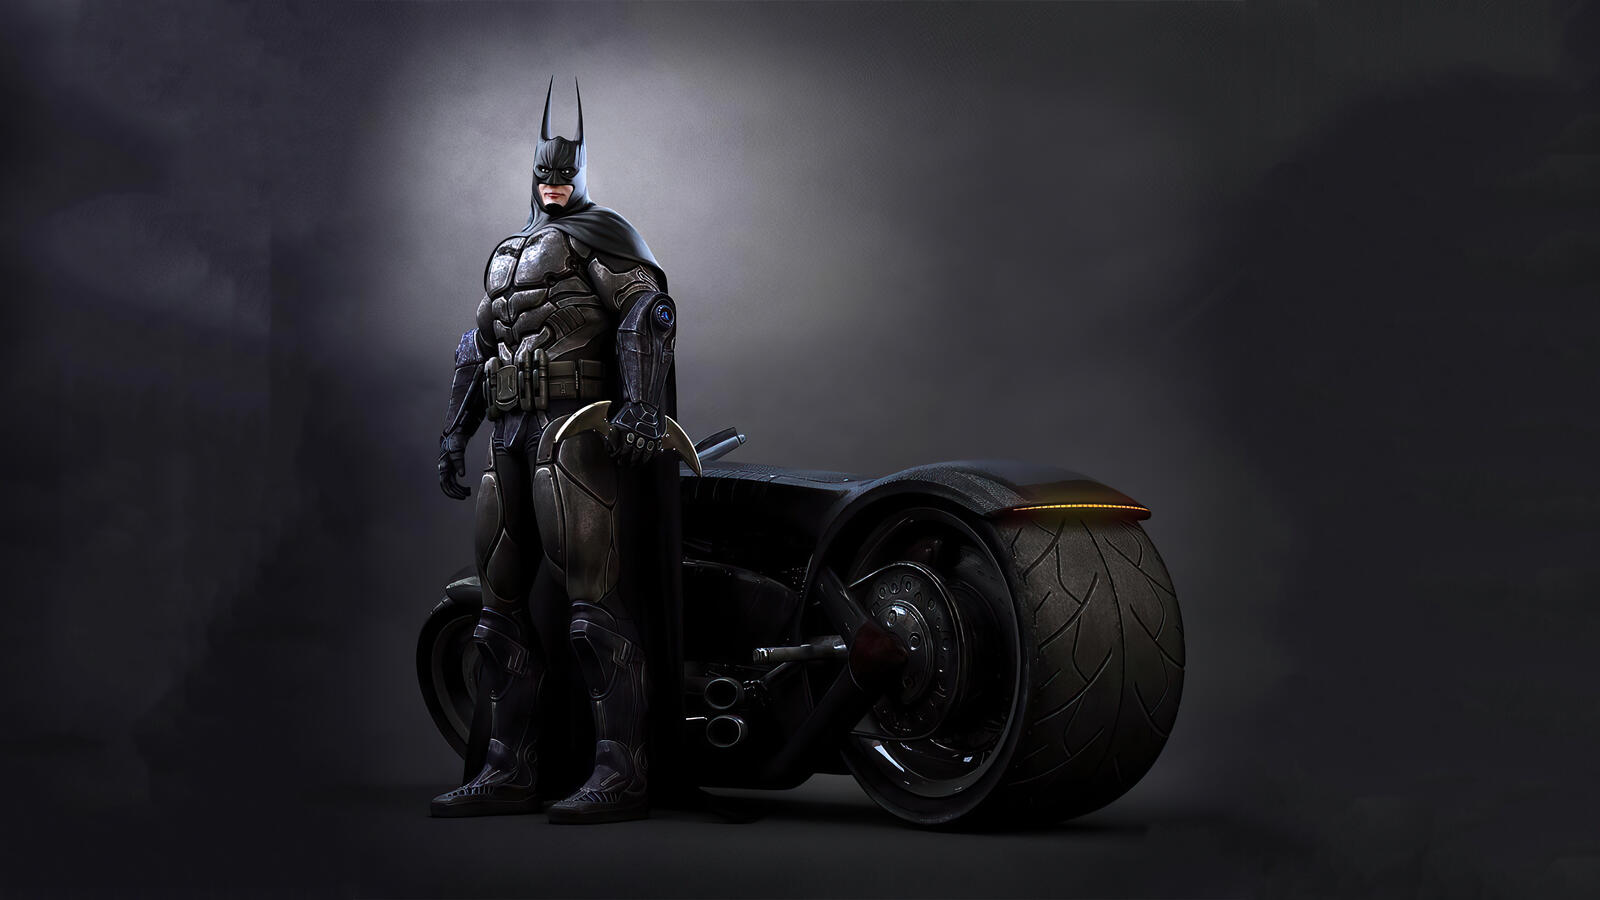 Free photo Batman in the darkness next to the motorcycle.